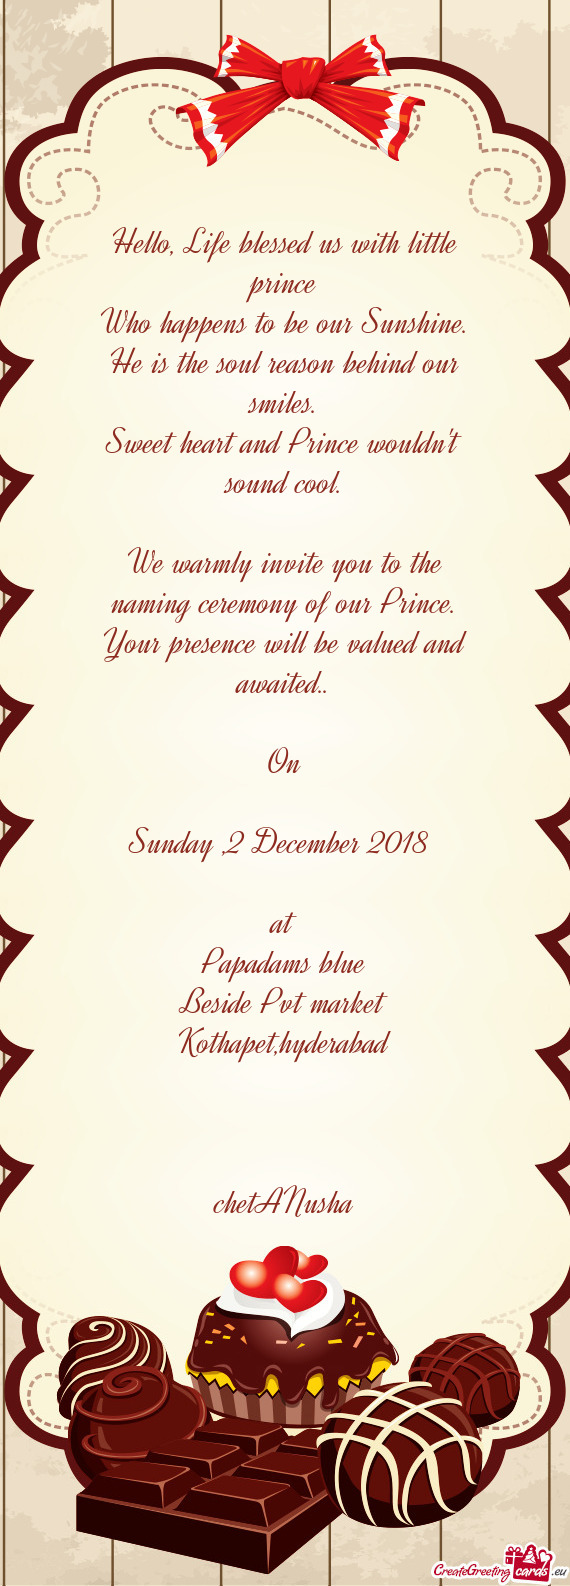 We warmly invite you to the naming ceremony of our Prince